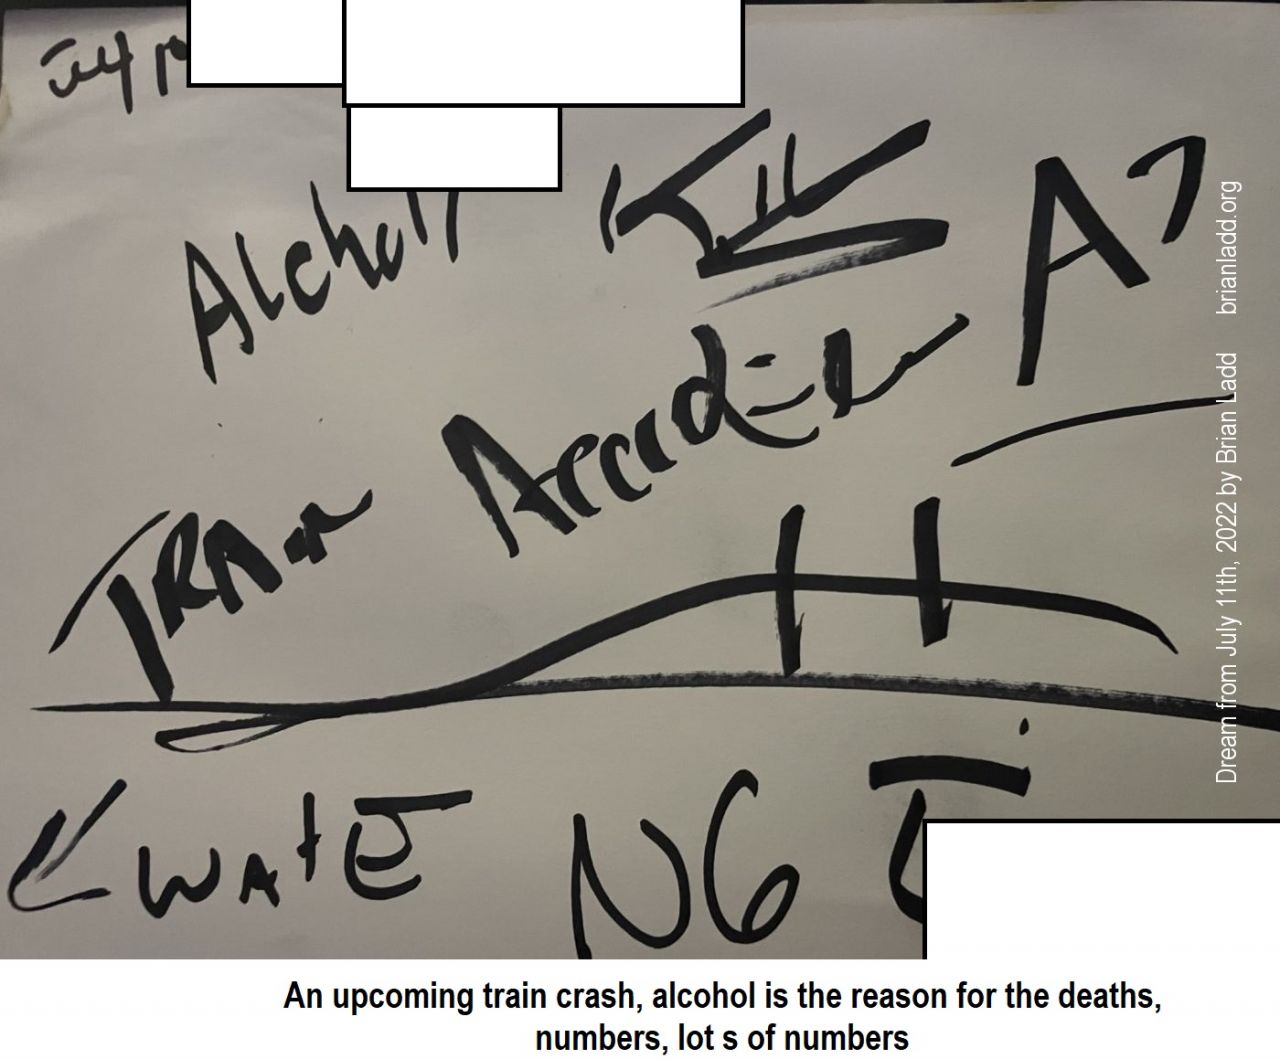 11 July 2022 2  An upcoming train crash, alcohol is the reason for the deaths, numbers, lot s of numbers
An upcoming train crash, alcohol is the reason for the deaths, numbers, lot s of numbers
